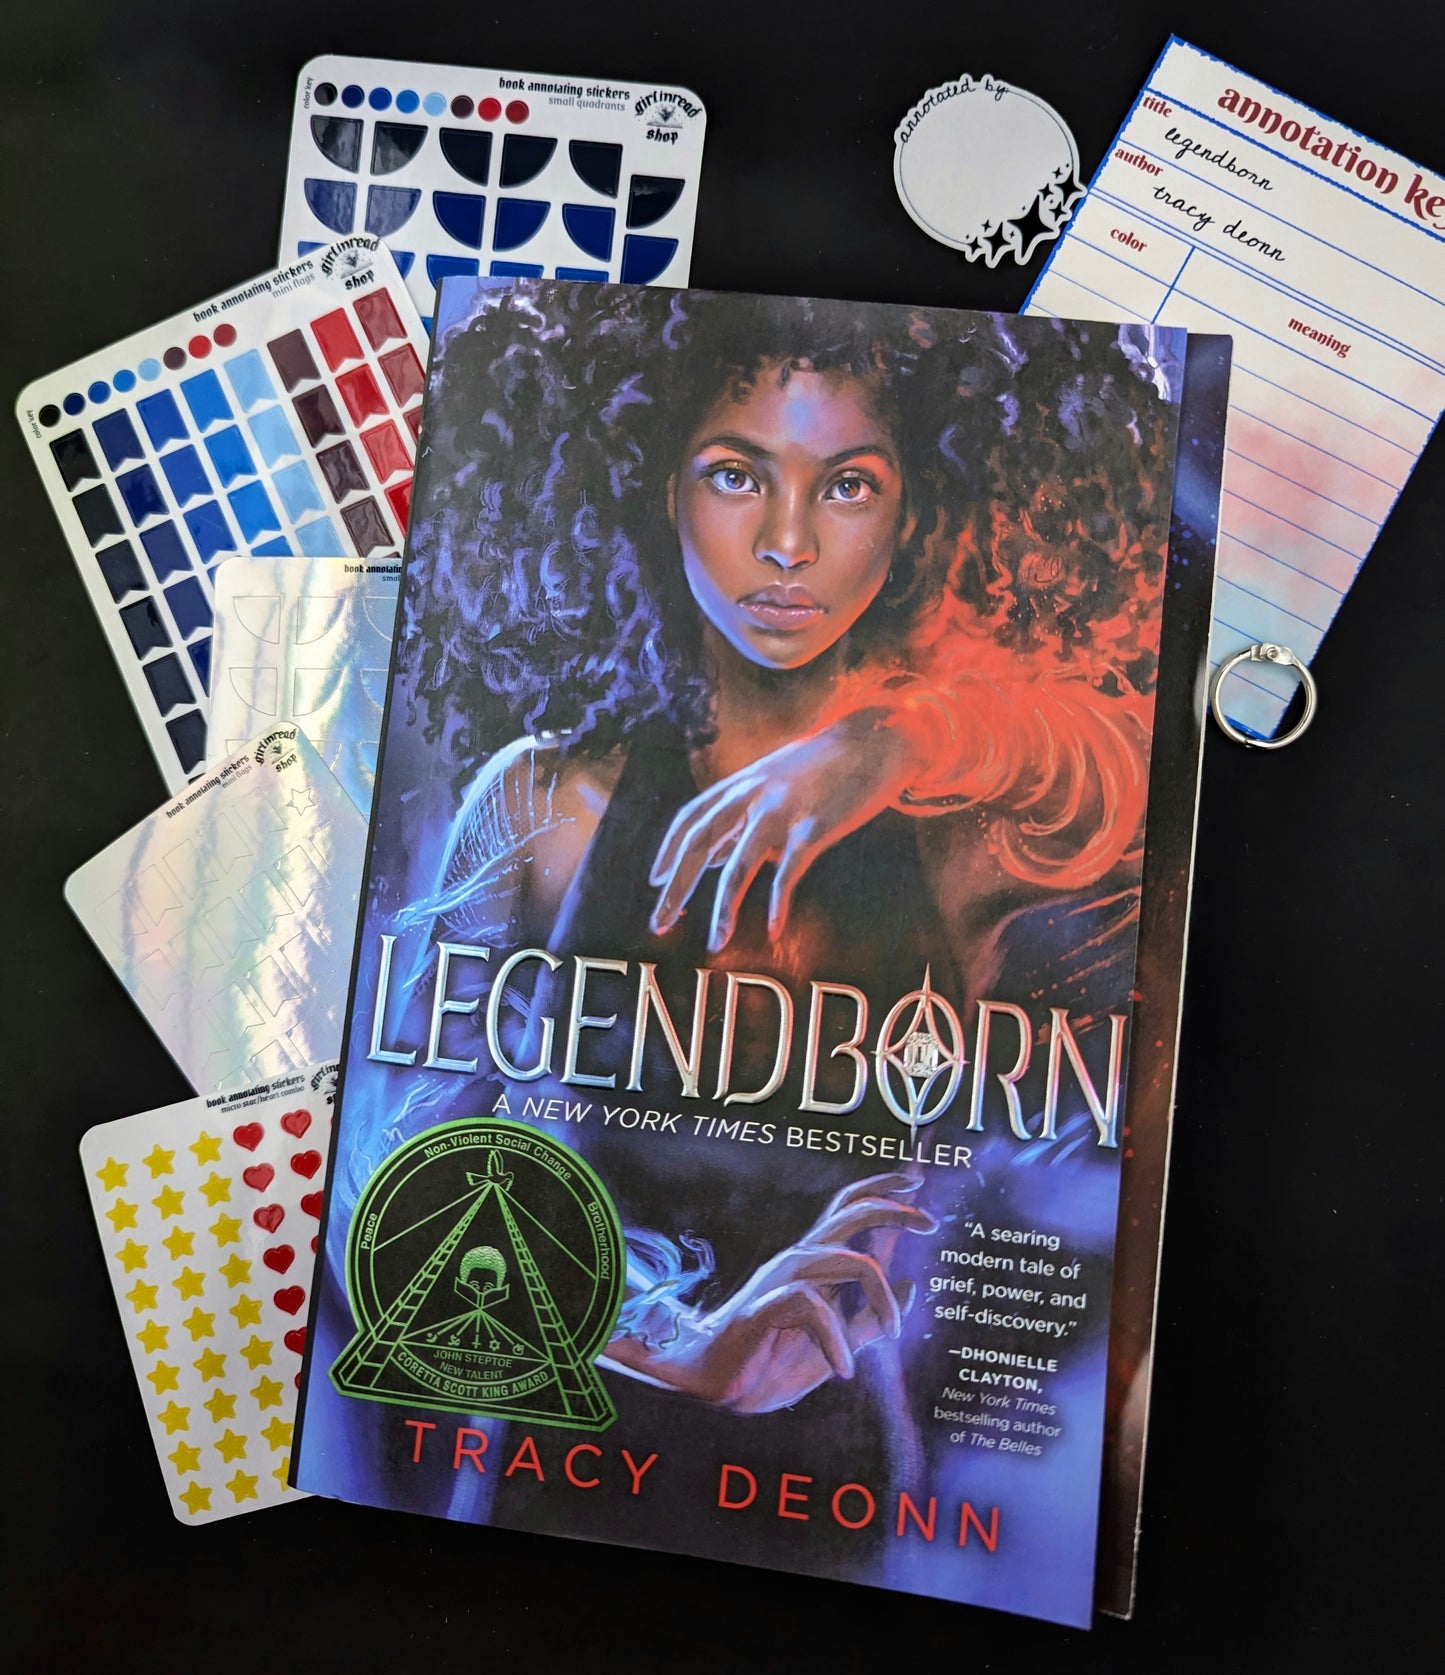 legendborn book annotating giftset (book included)